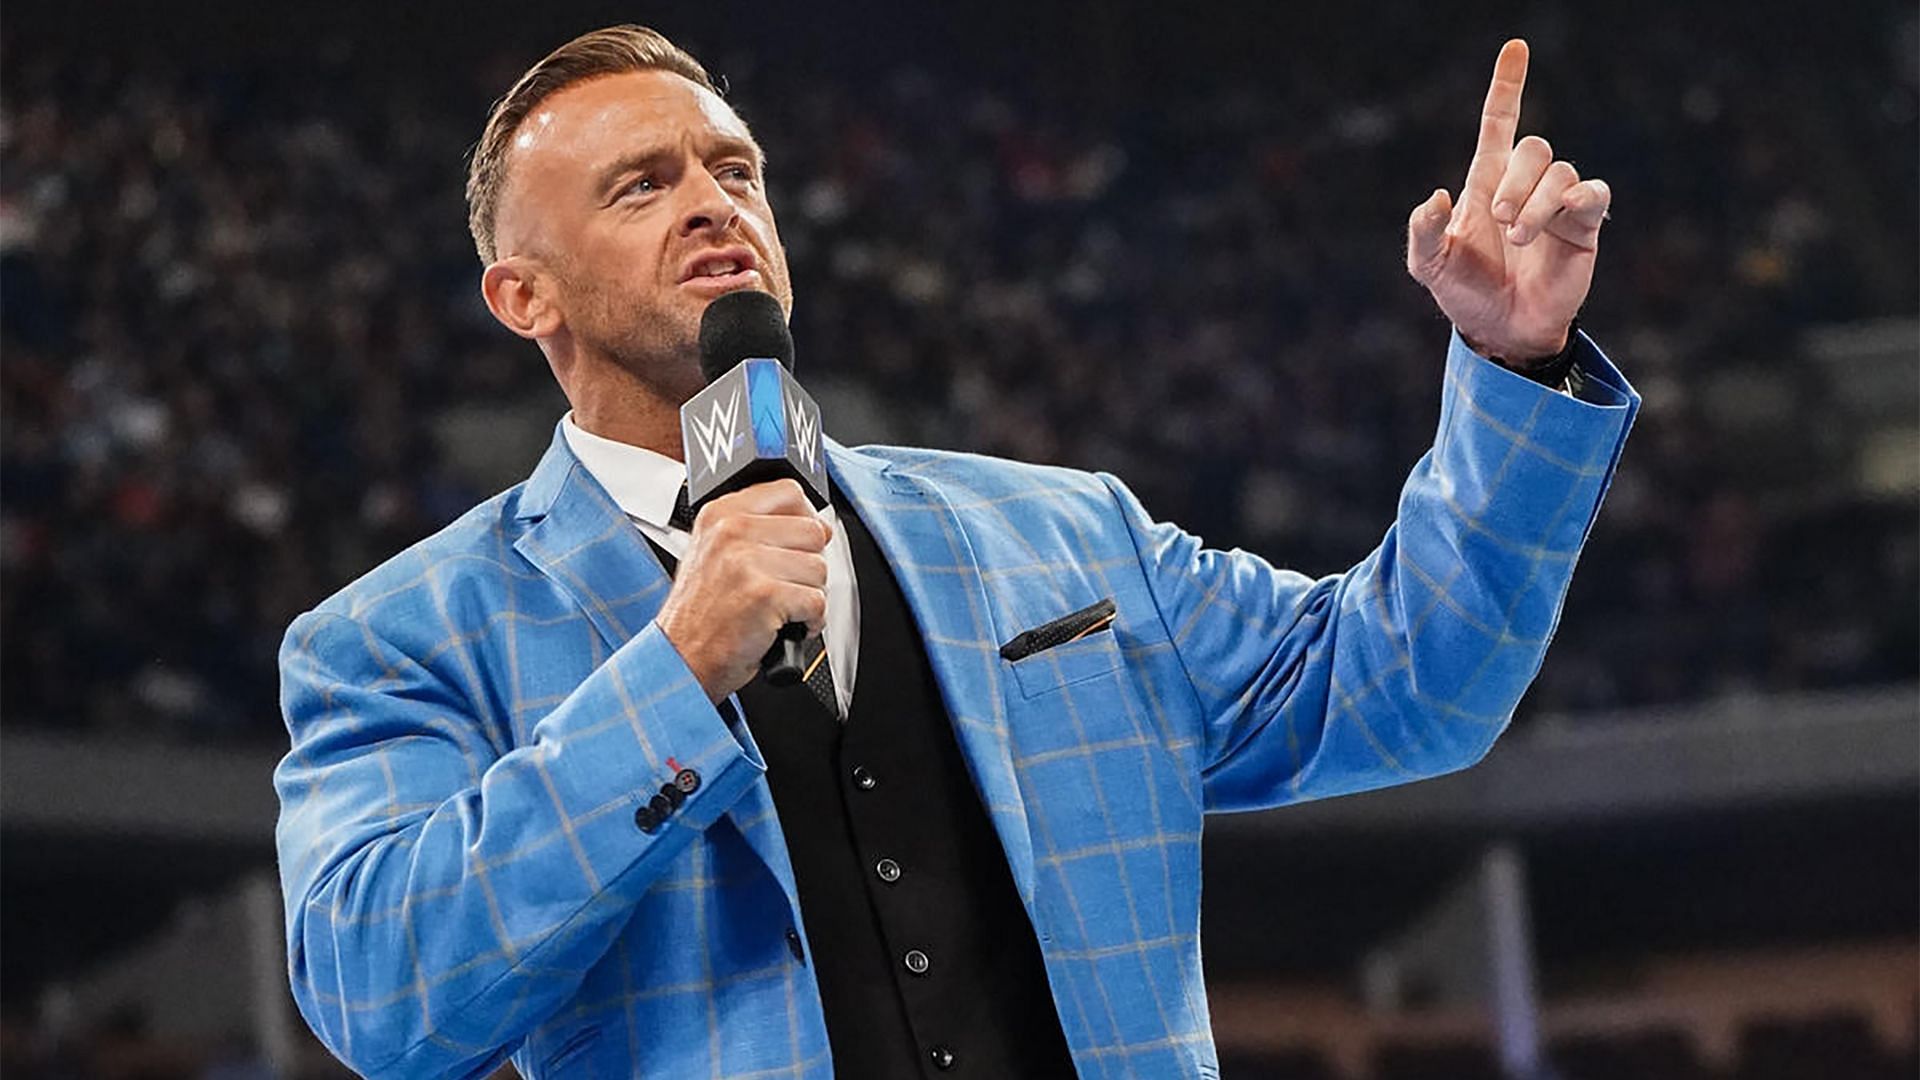 Nick Aldis makes the rules as GM on WWE SmackDown